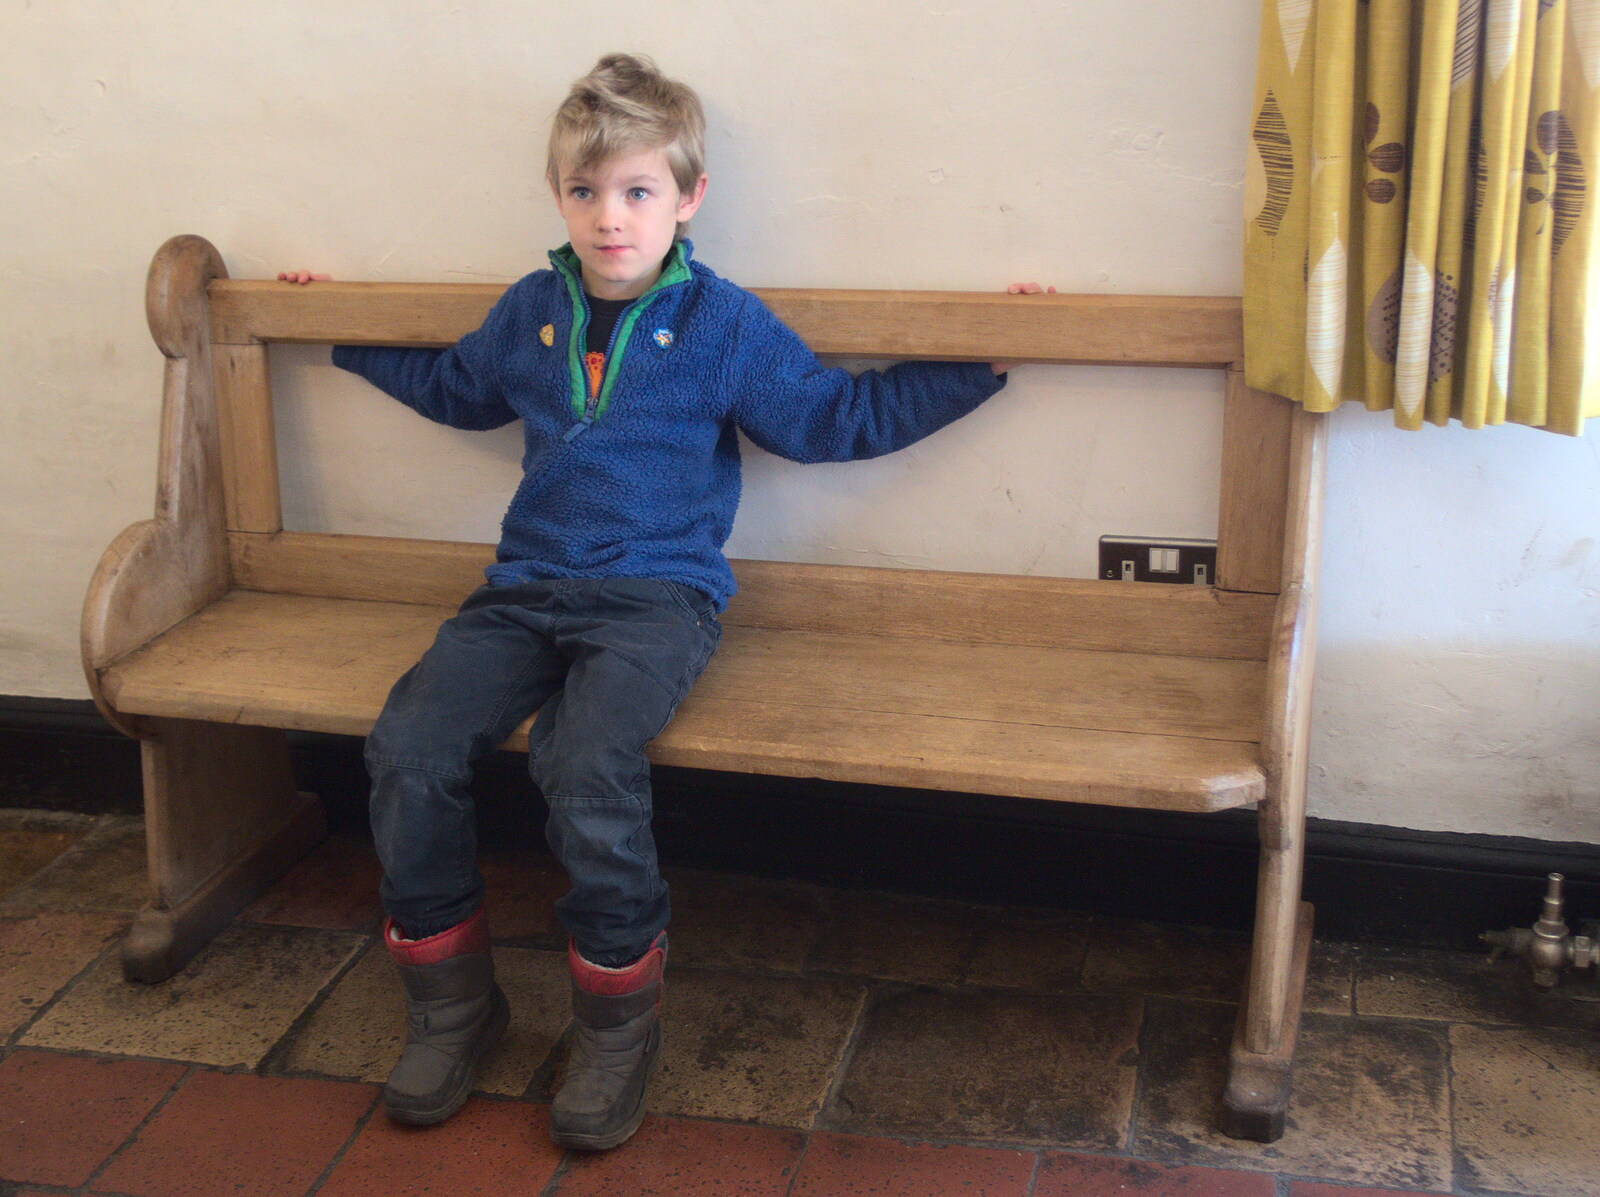 A Walk Around Eye, and the Return of Red Tent, Suffolk and London - 25th February 2018: Harry grabs the back of a bench